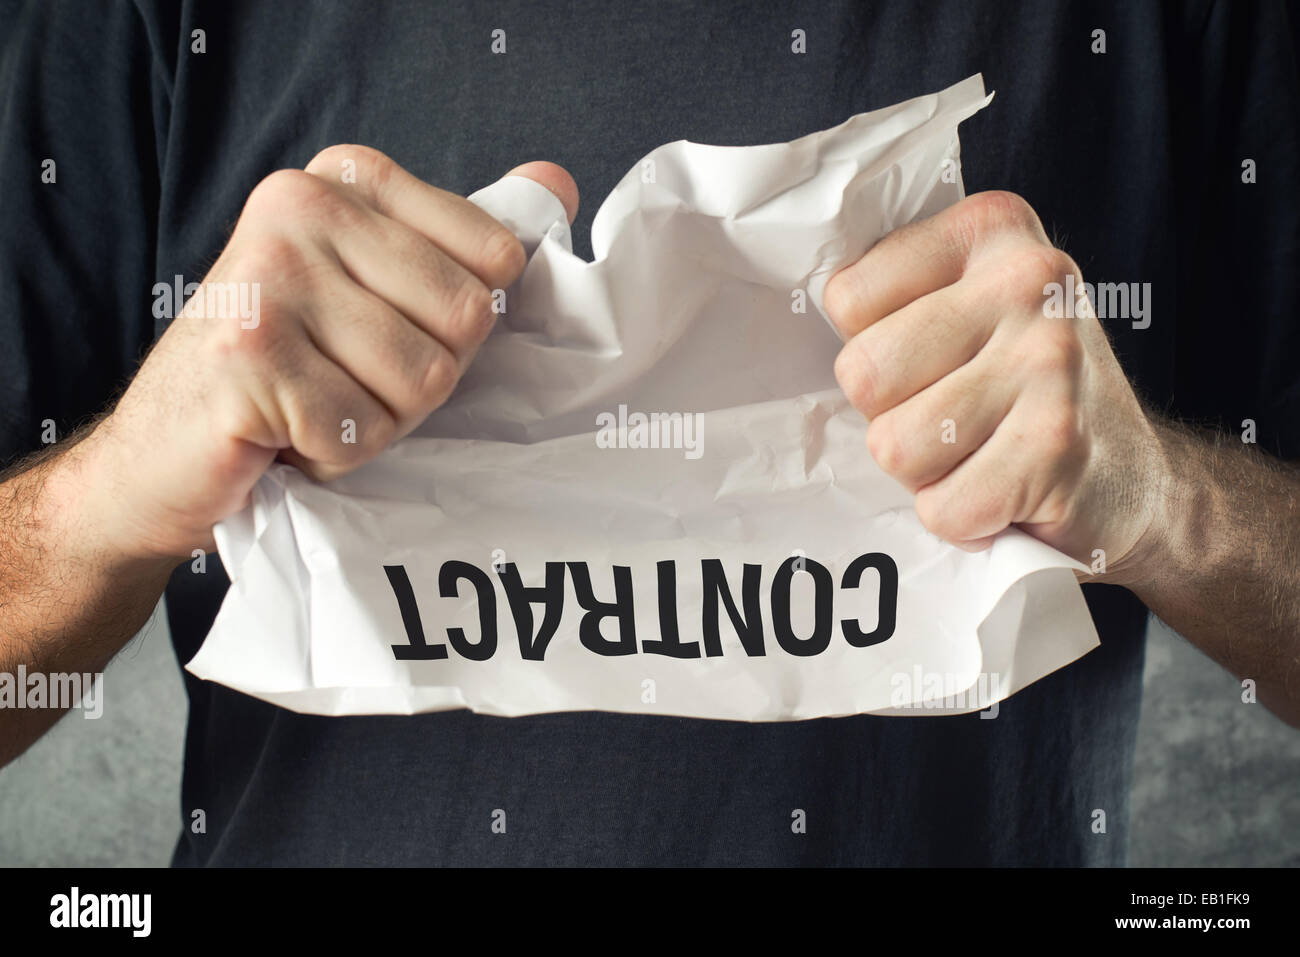 Man tearing contract paper. Bad ideas or project mistakes concept. Stock Photo